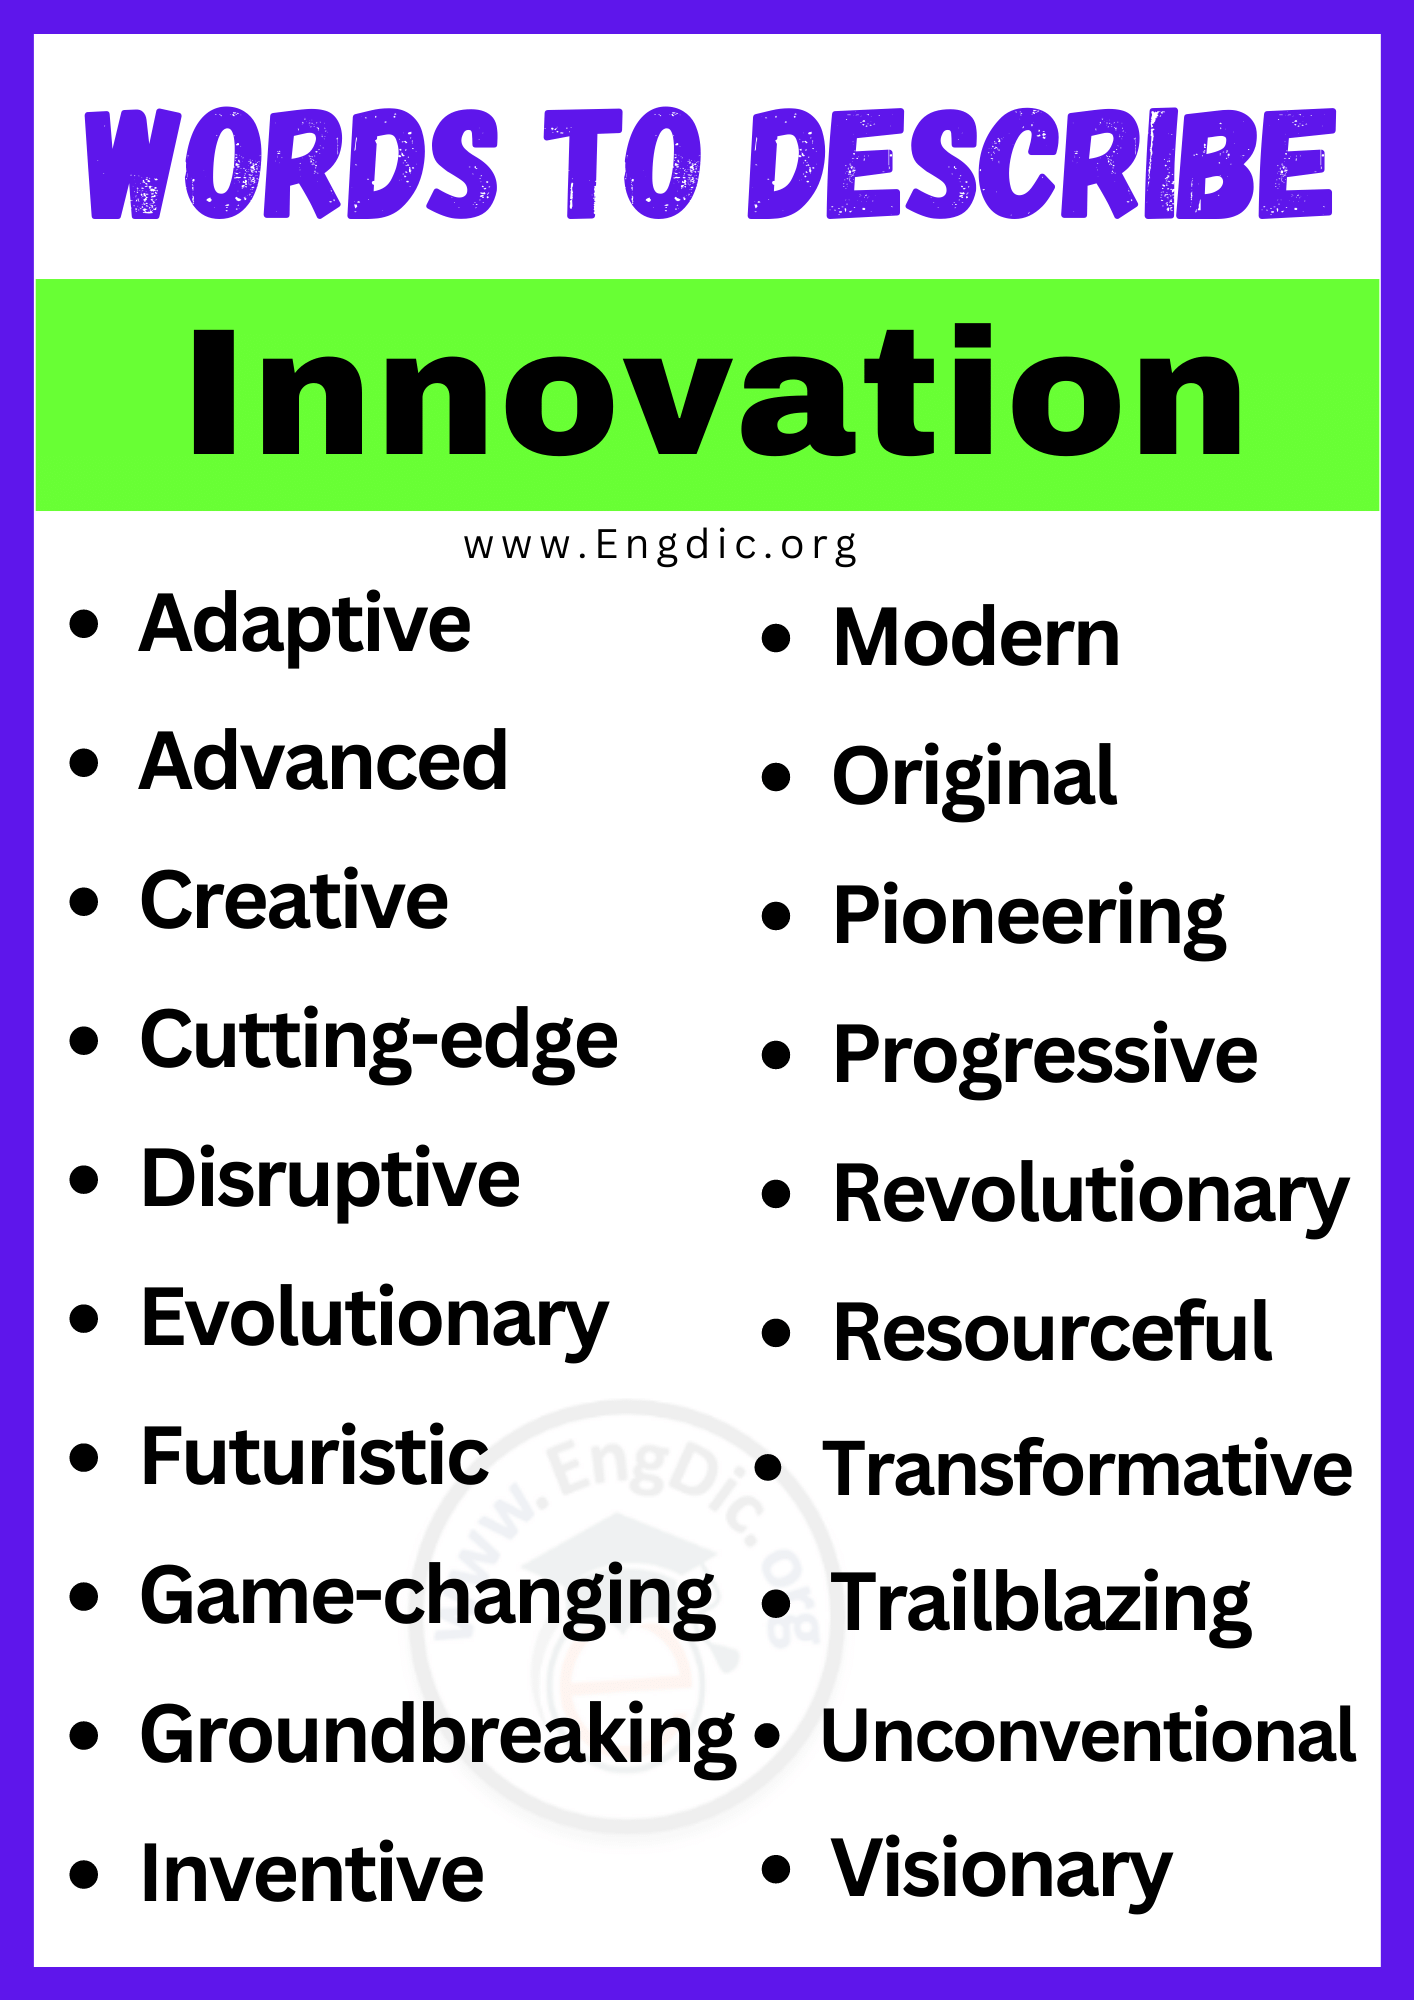 Words to Describe Innovation